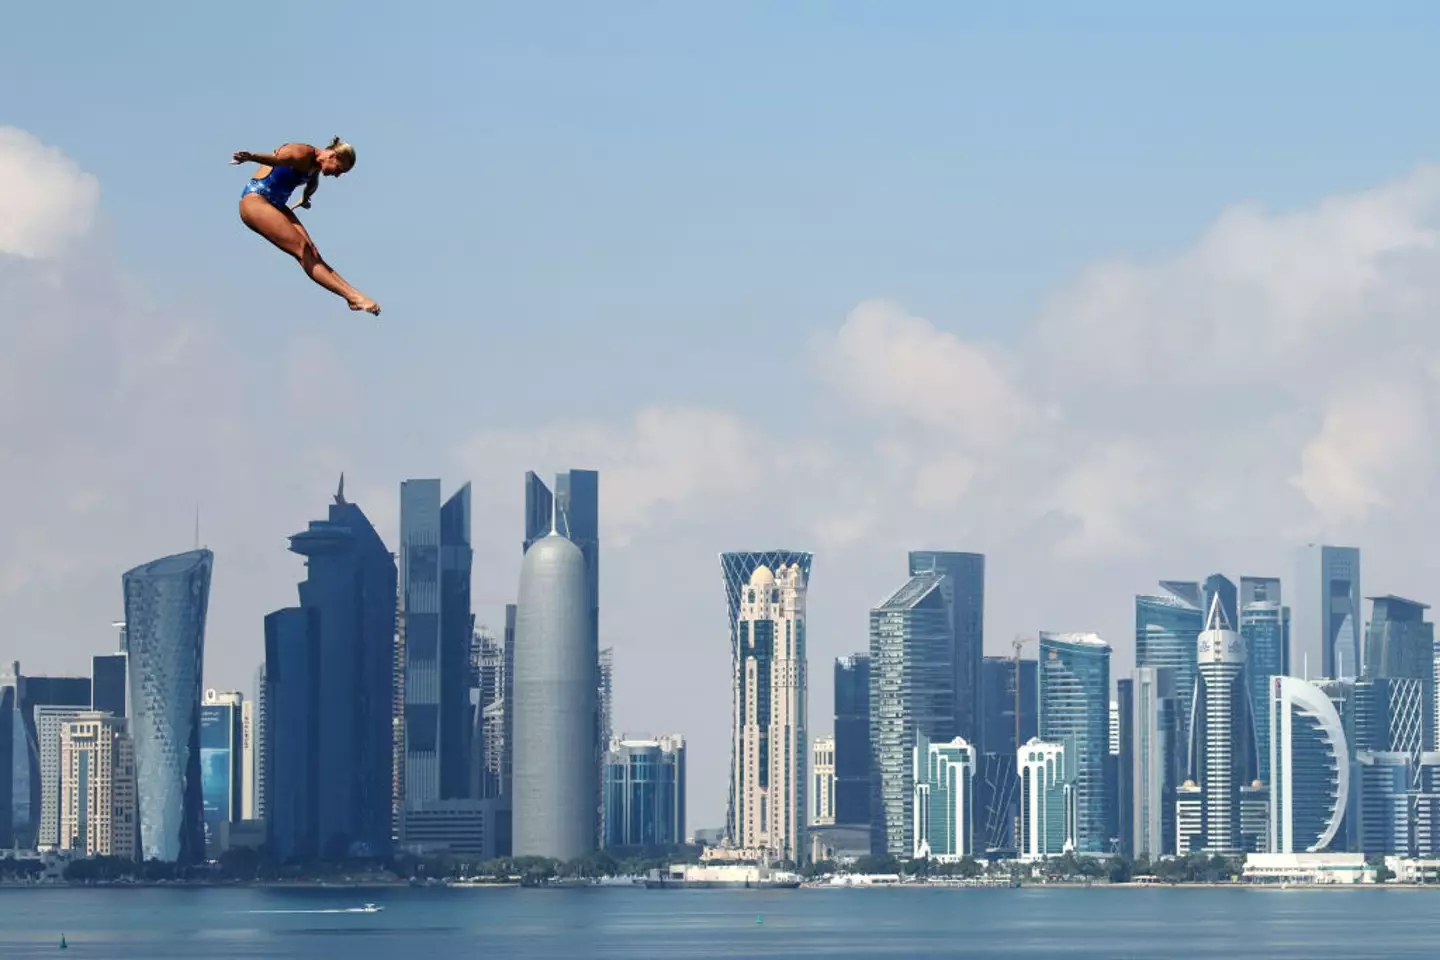 Rhiannan Iffland won gold for the Women's 20m High Diving at the Doha 2024 World Aquatics Championships. (Image: Getty)